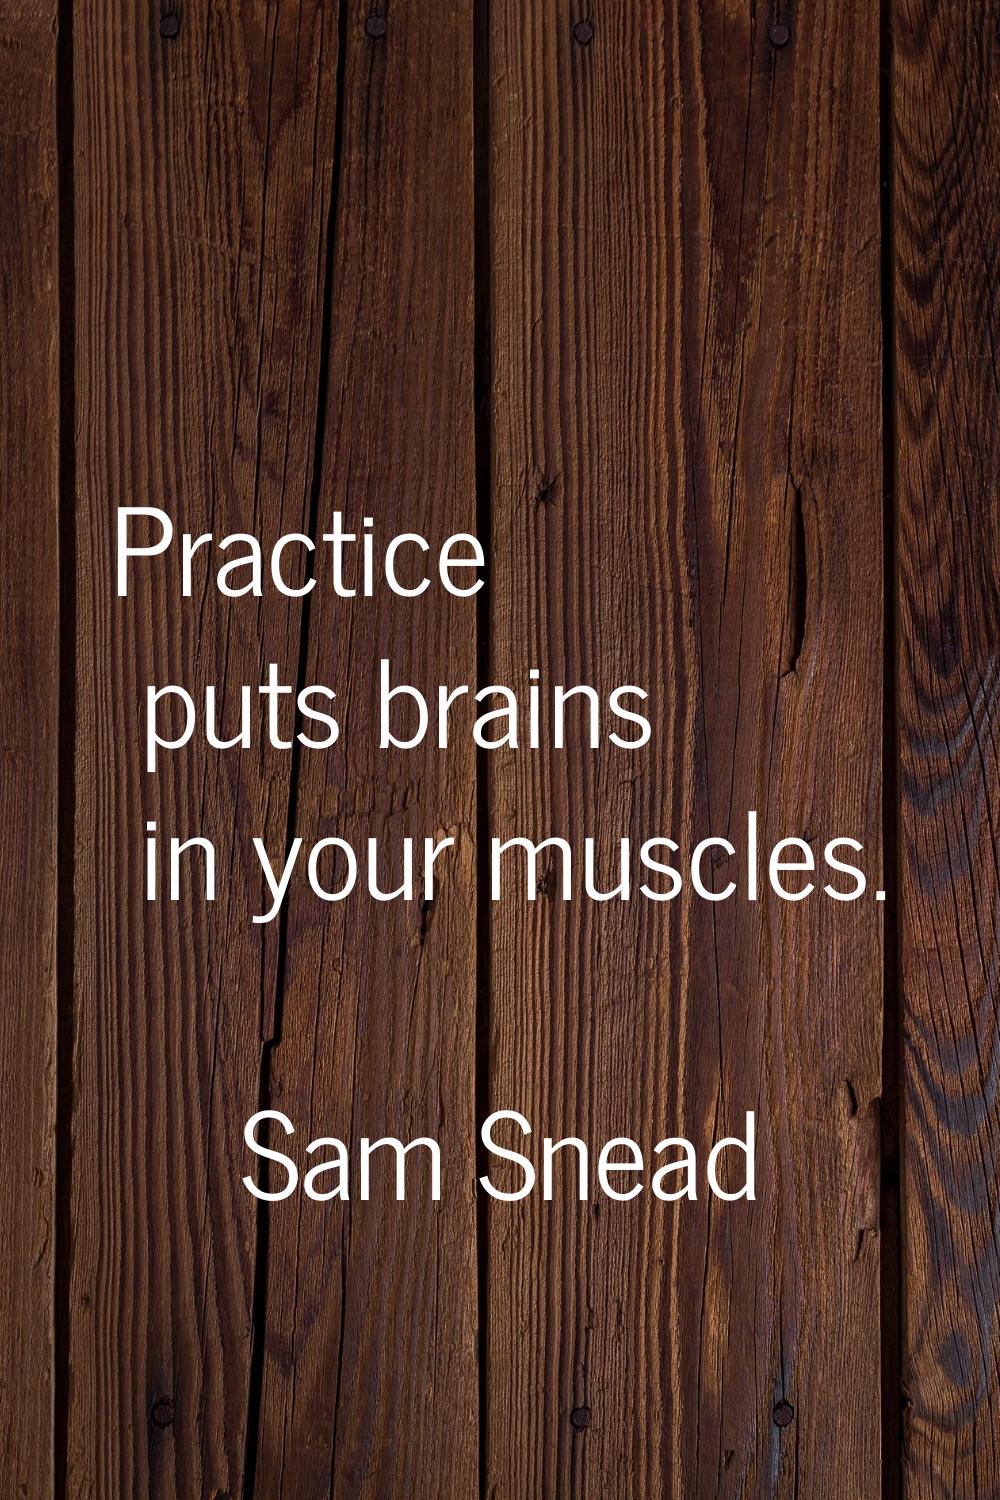 Practice puts brains in your muscles.